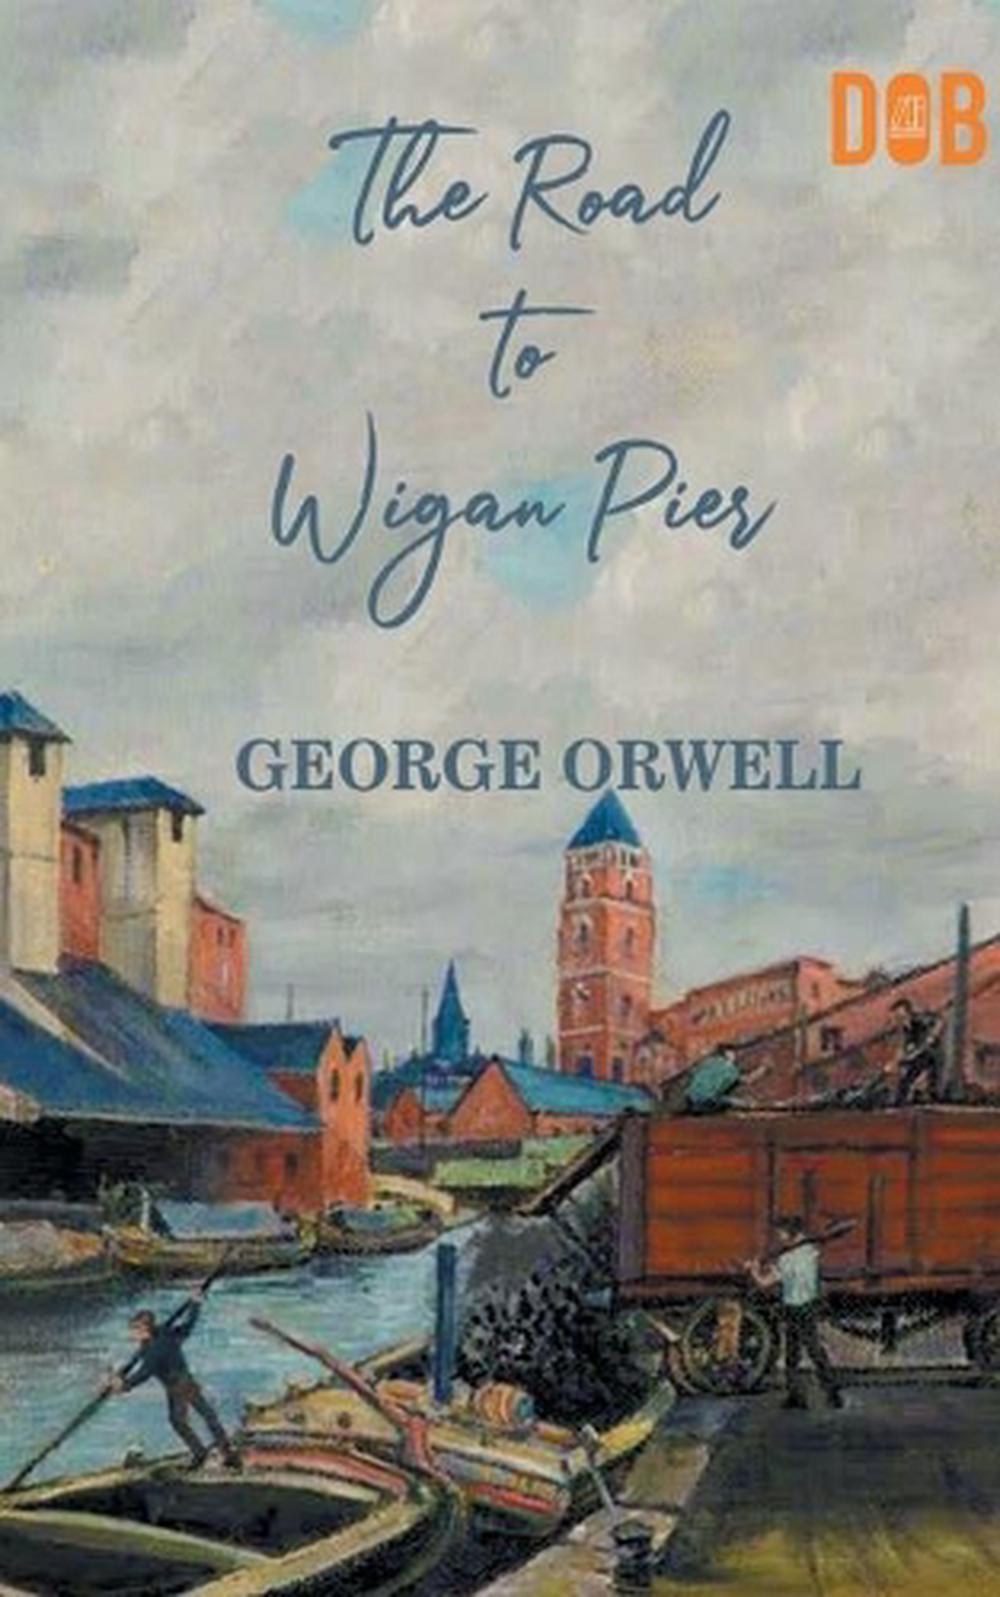 book the road to wigan pier